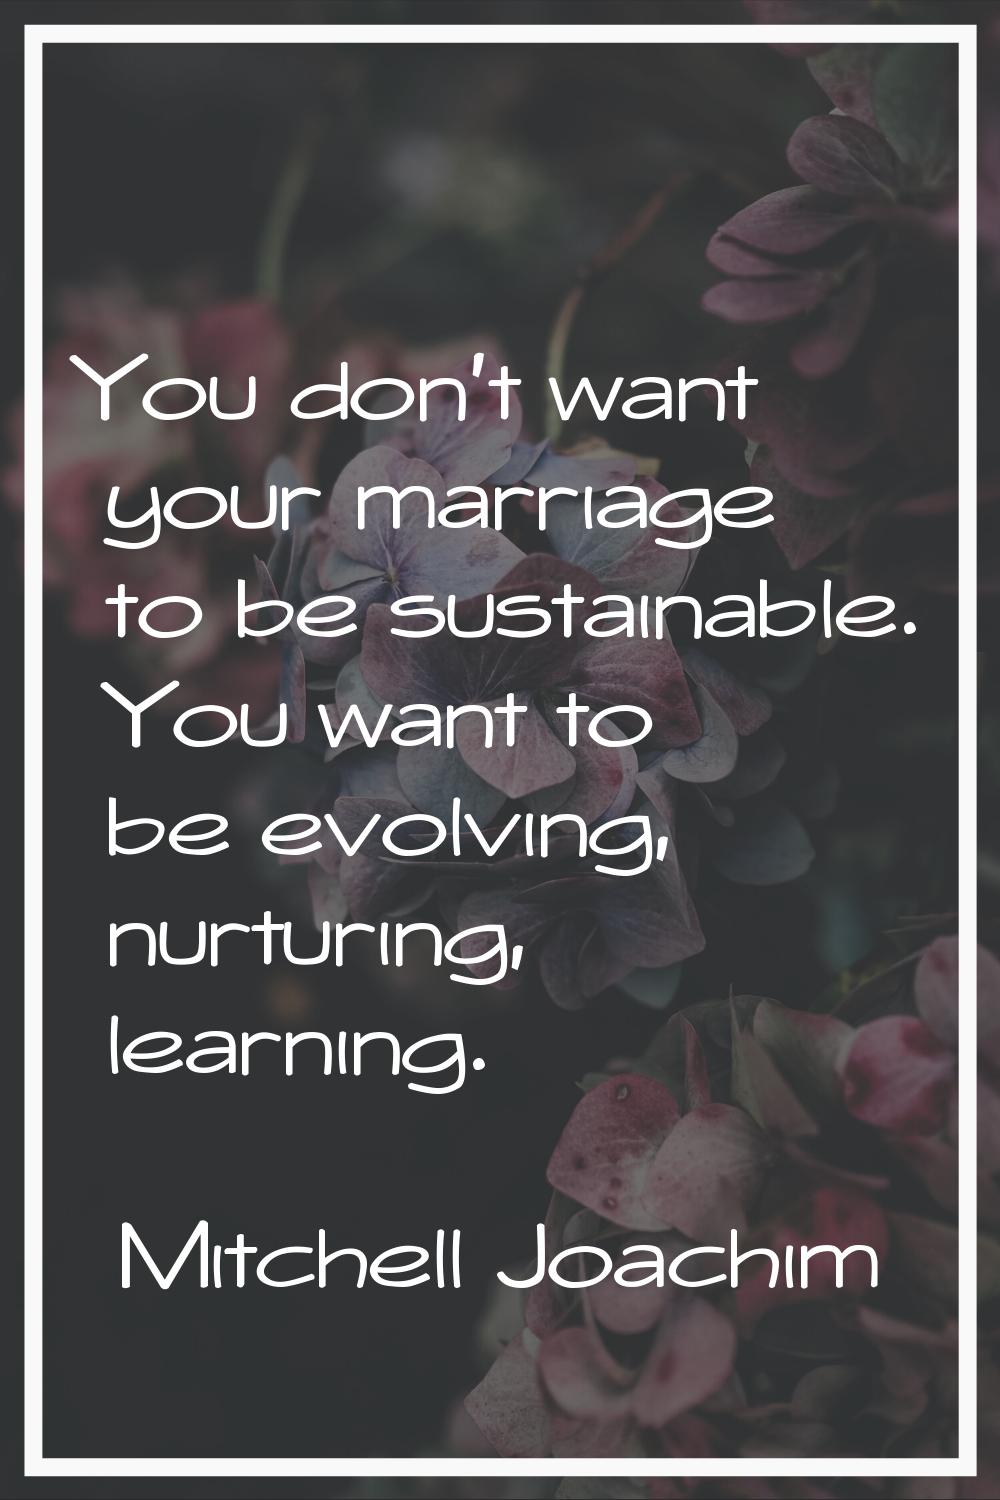 You don't want your marriage to be sustainable. You want to be evolving, nurturing, learning.